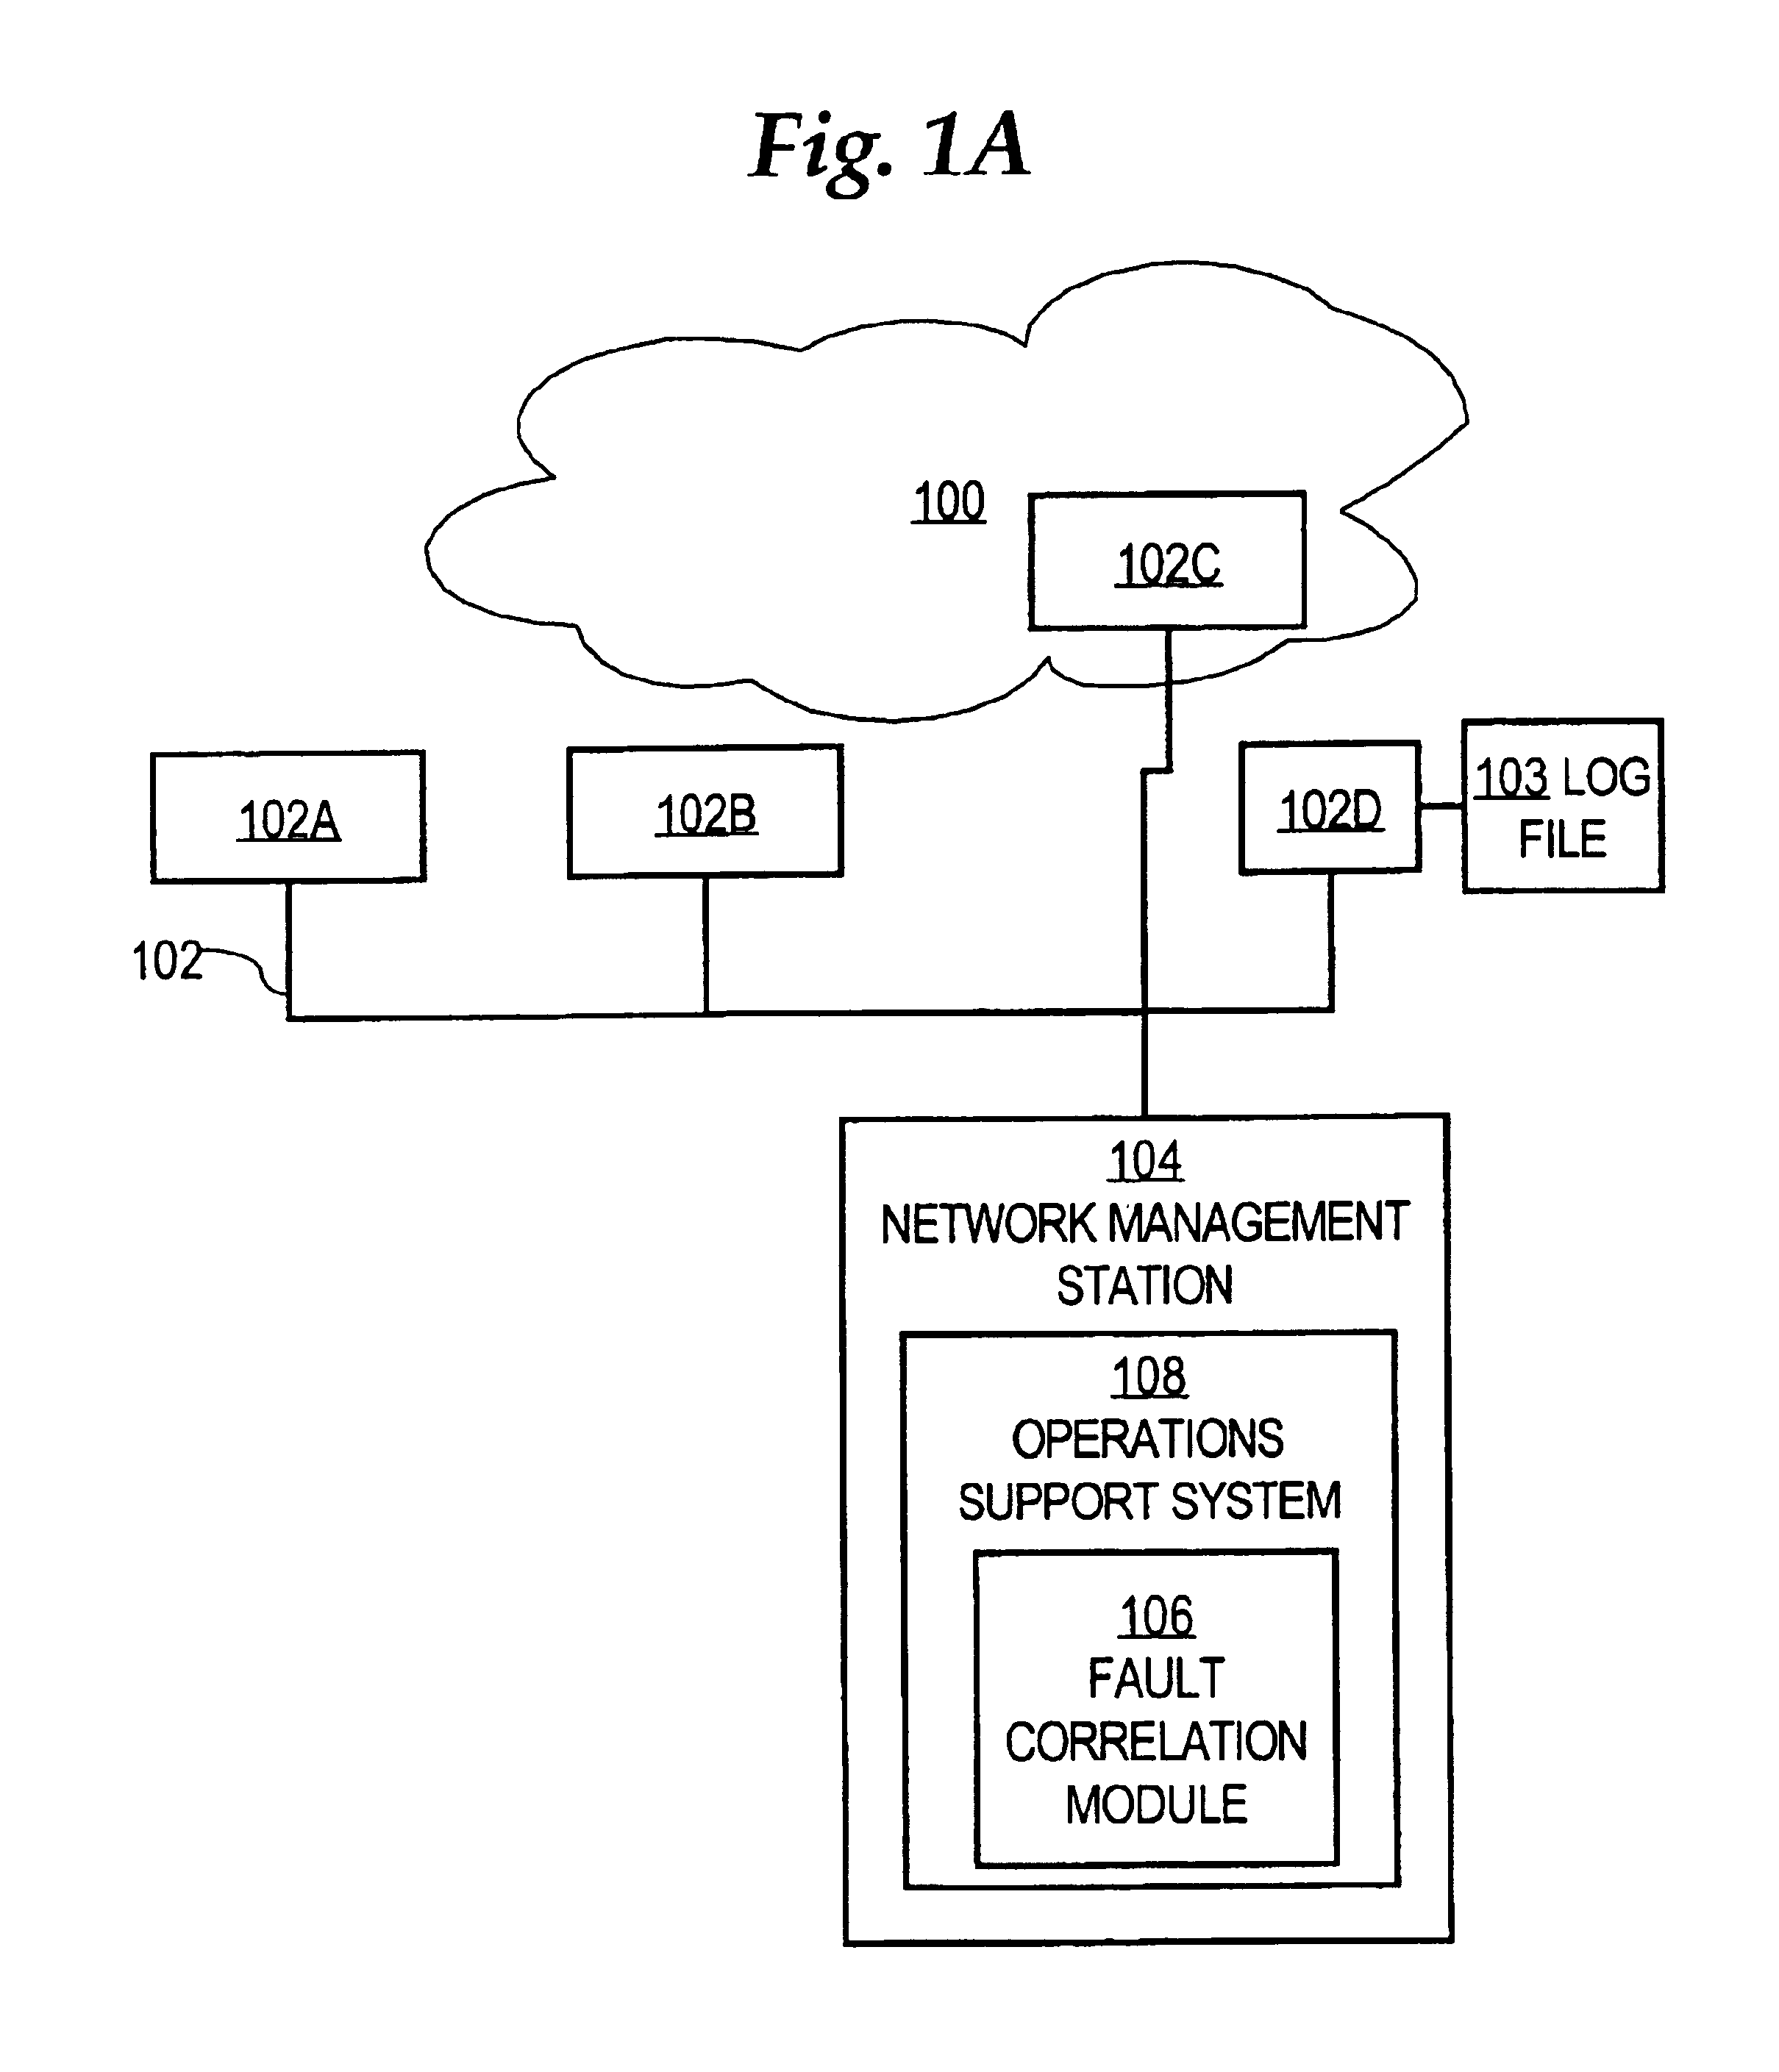 Method of labeling alarms to facilitate correlating alarms in a telecommunications network